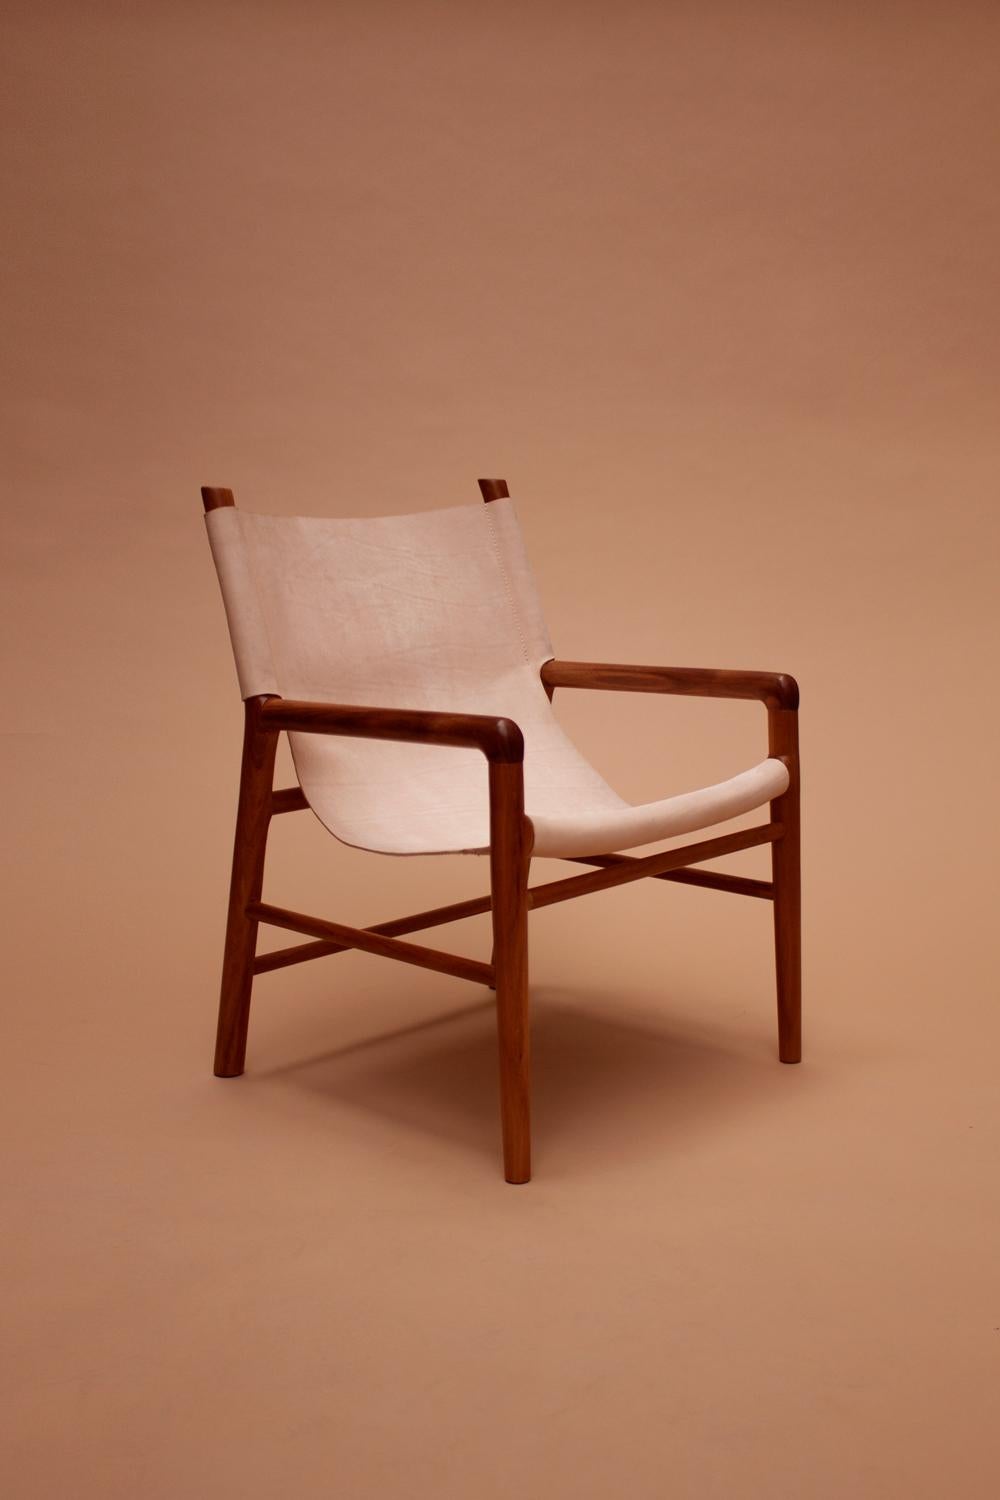 
Introducing our exquisite handcrafted chair, meticulously crafted from tropical Tzalam wood and adorned with natural leather, a true masterpiece from León León Design in Mexico City.

Each chair boasts a meticulously hand-carved Tzalam Wood